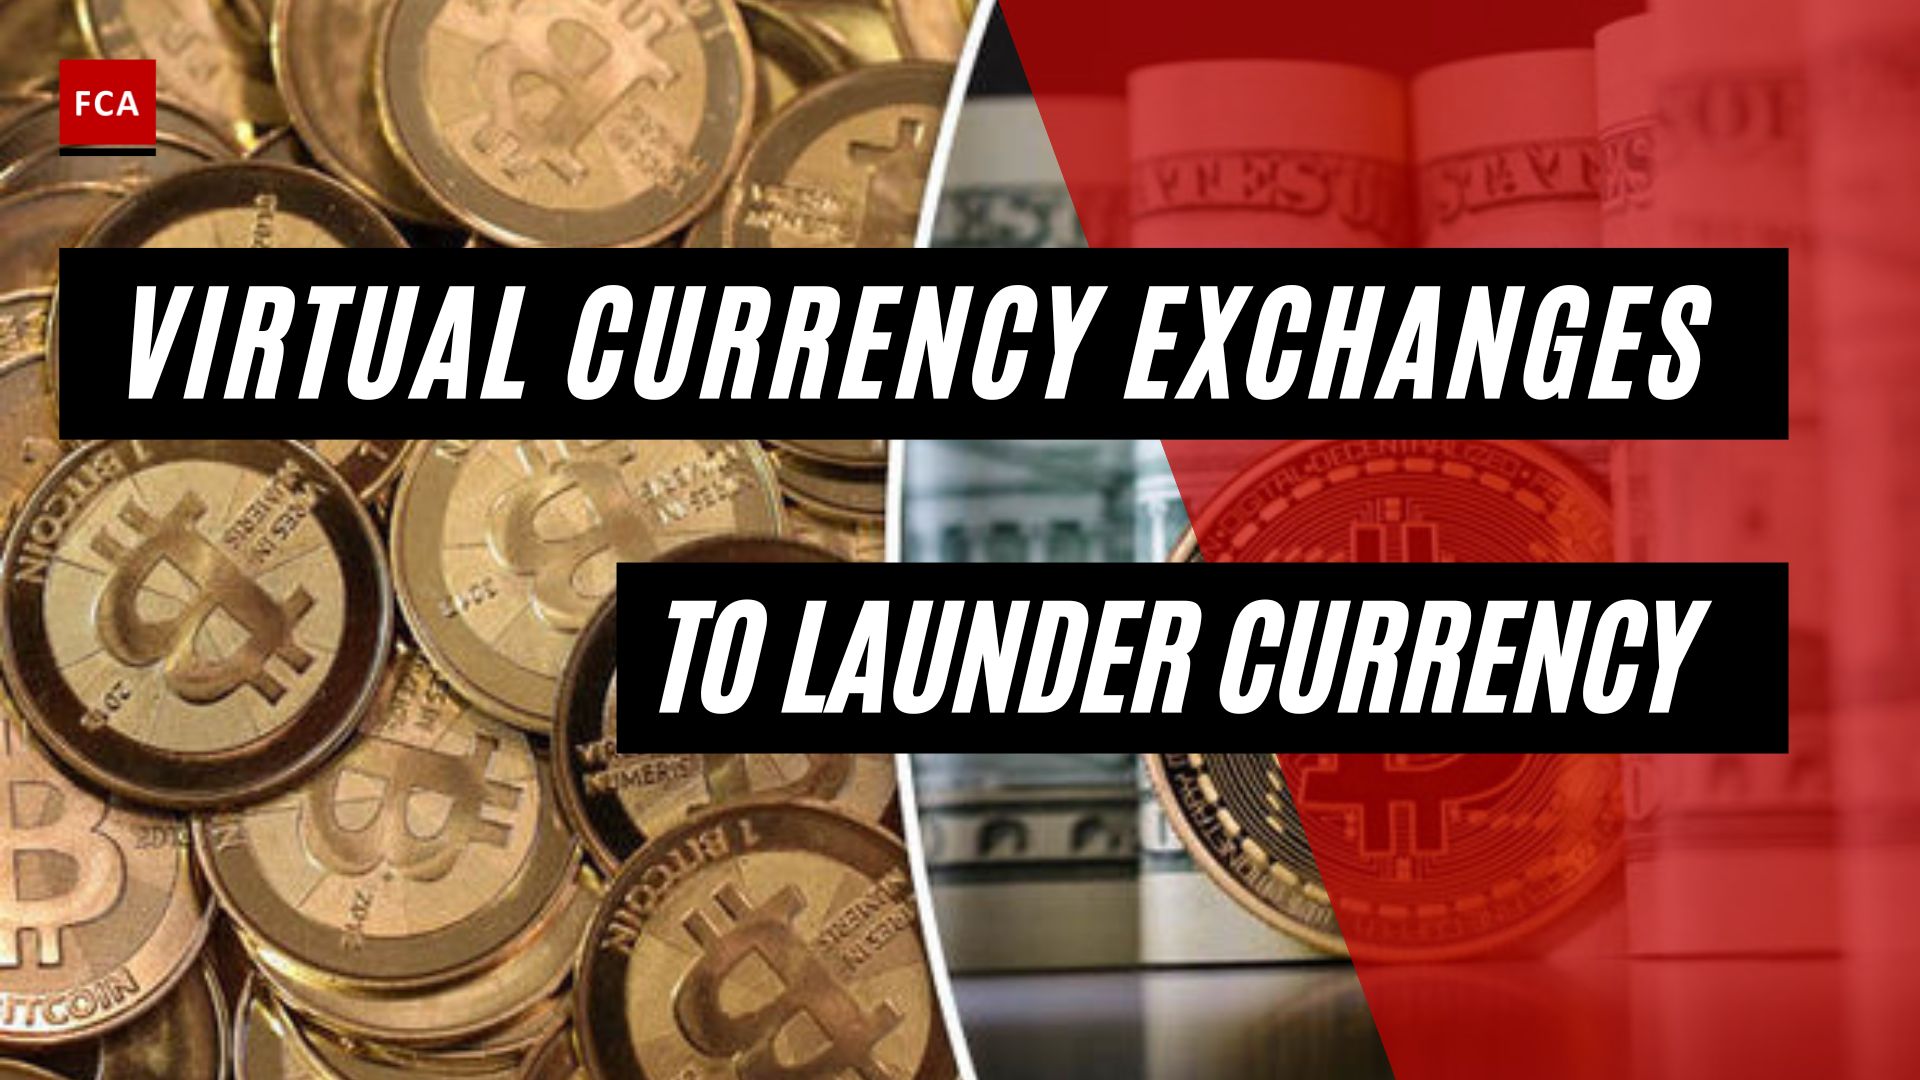 Virtual Currency Exchanges To Launder Currency